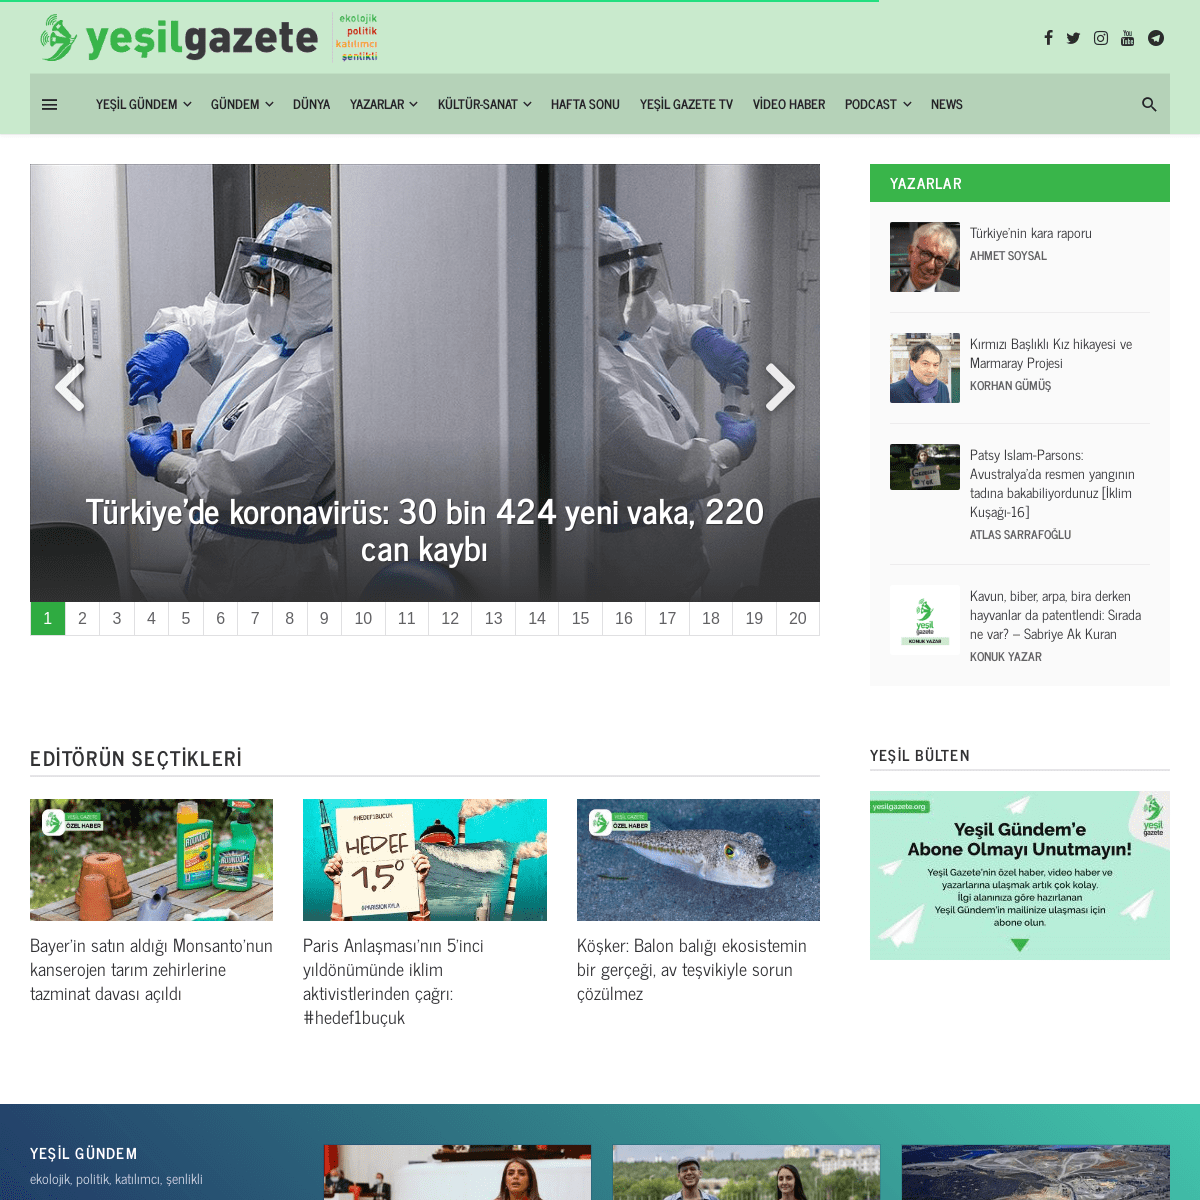 A complete backup of yesilgazete.org